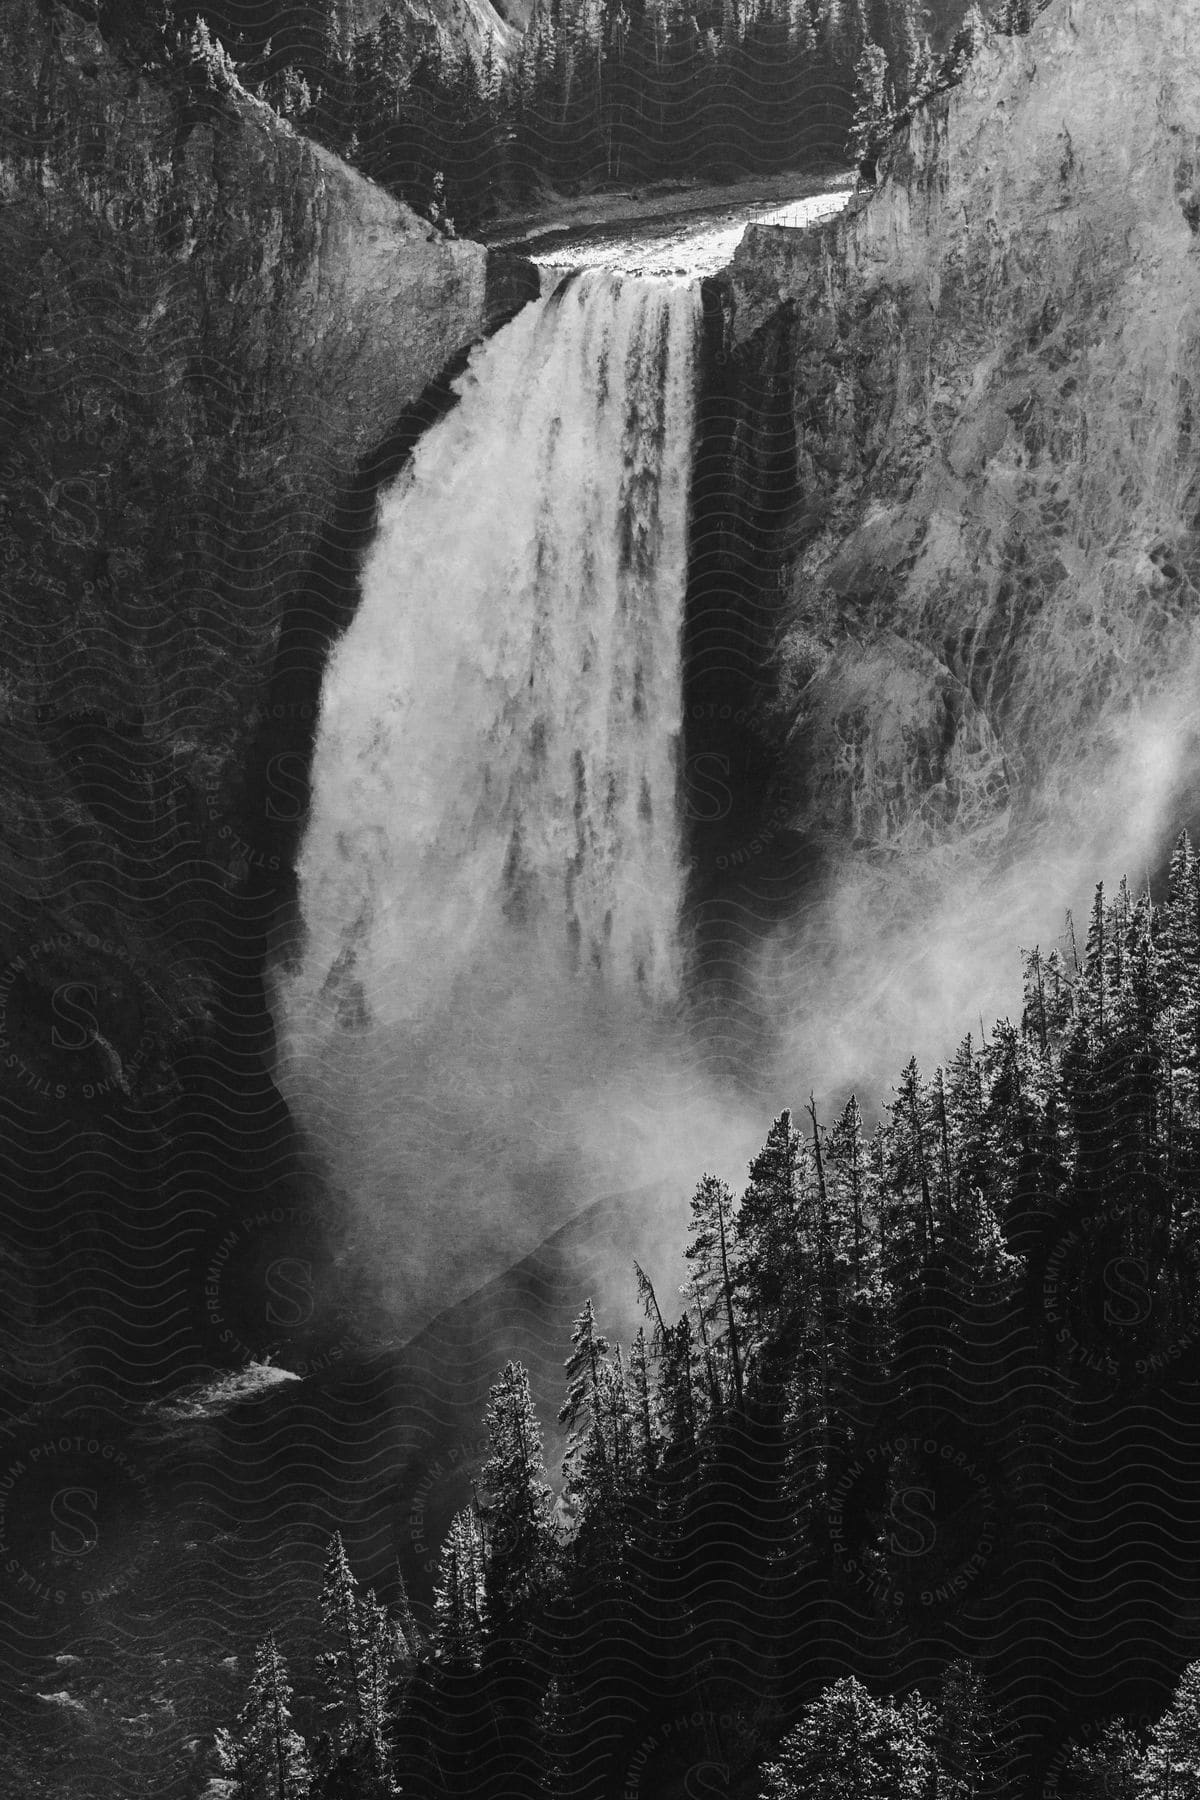 A blackandwhite image of a waterfall surrounded by trees and vegetation in a natural landscape